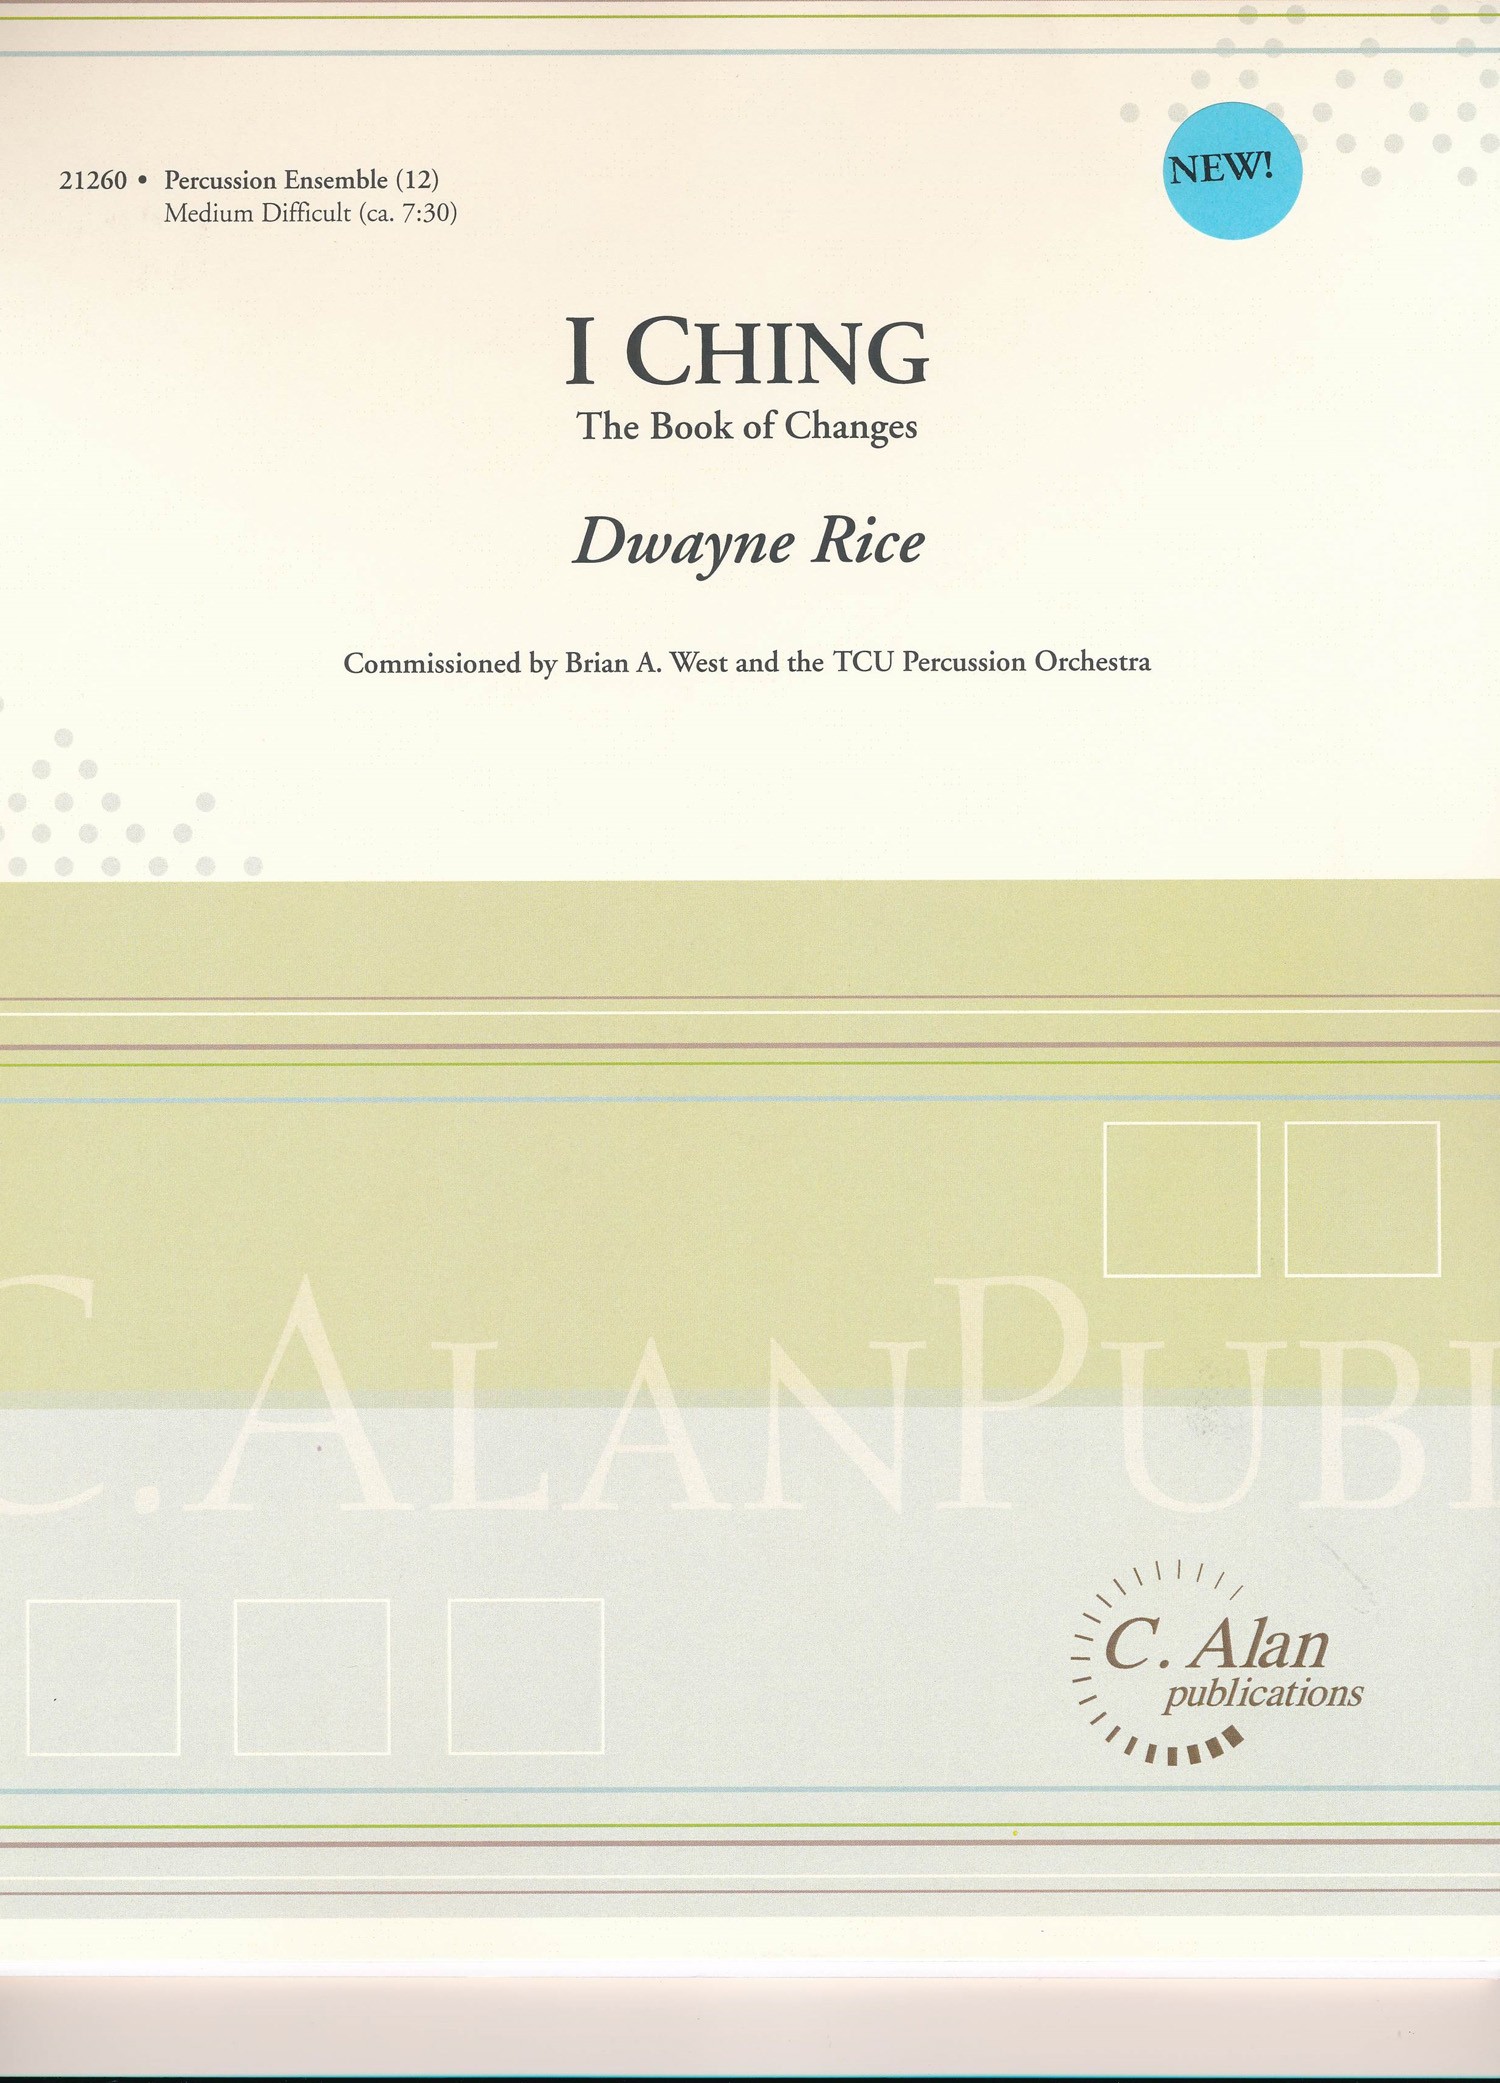 I Ching - The Book for Changes by Dwayne Rice